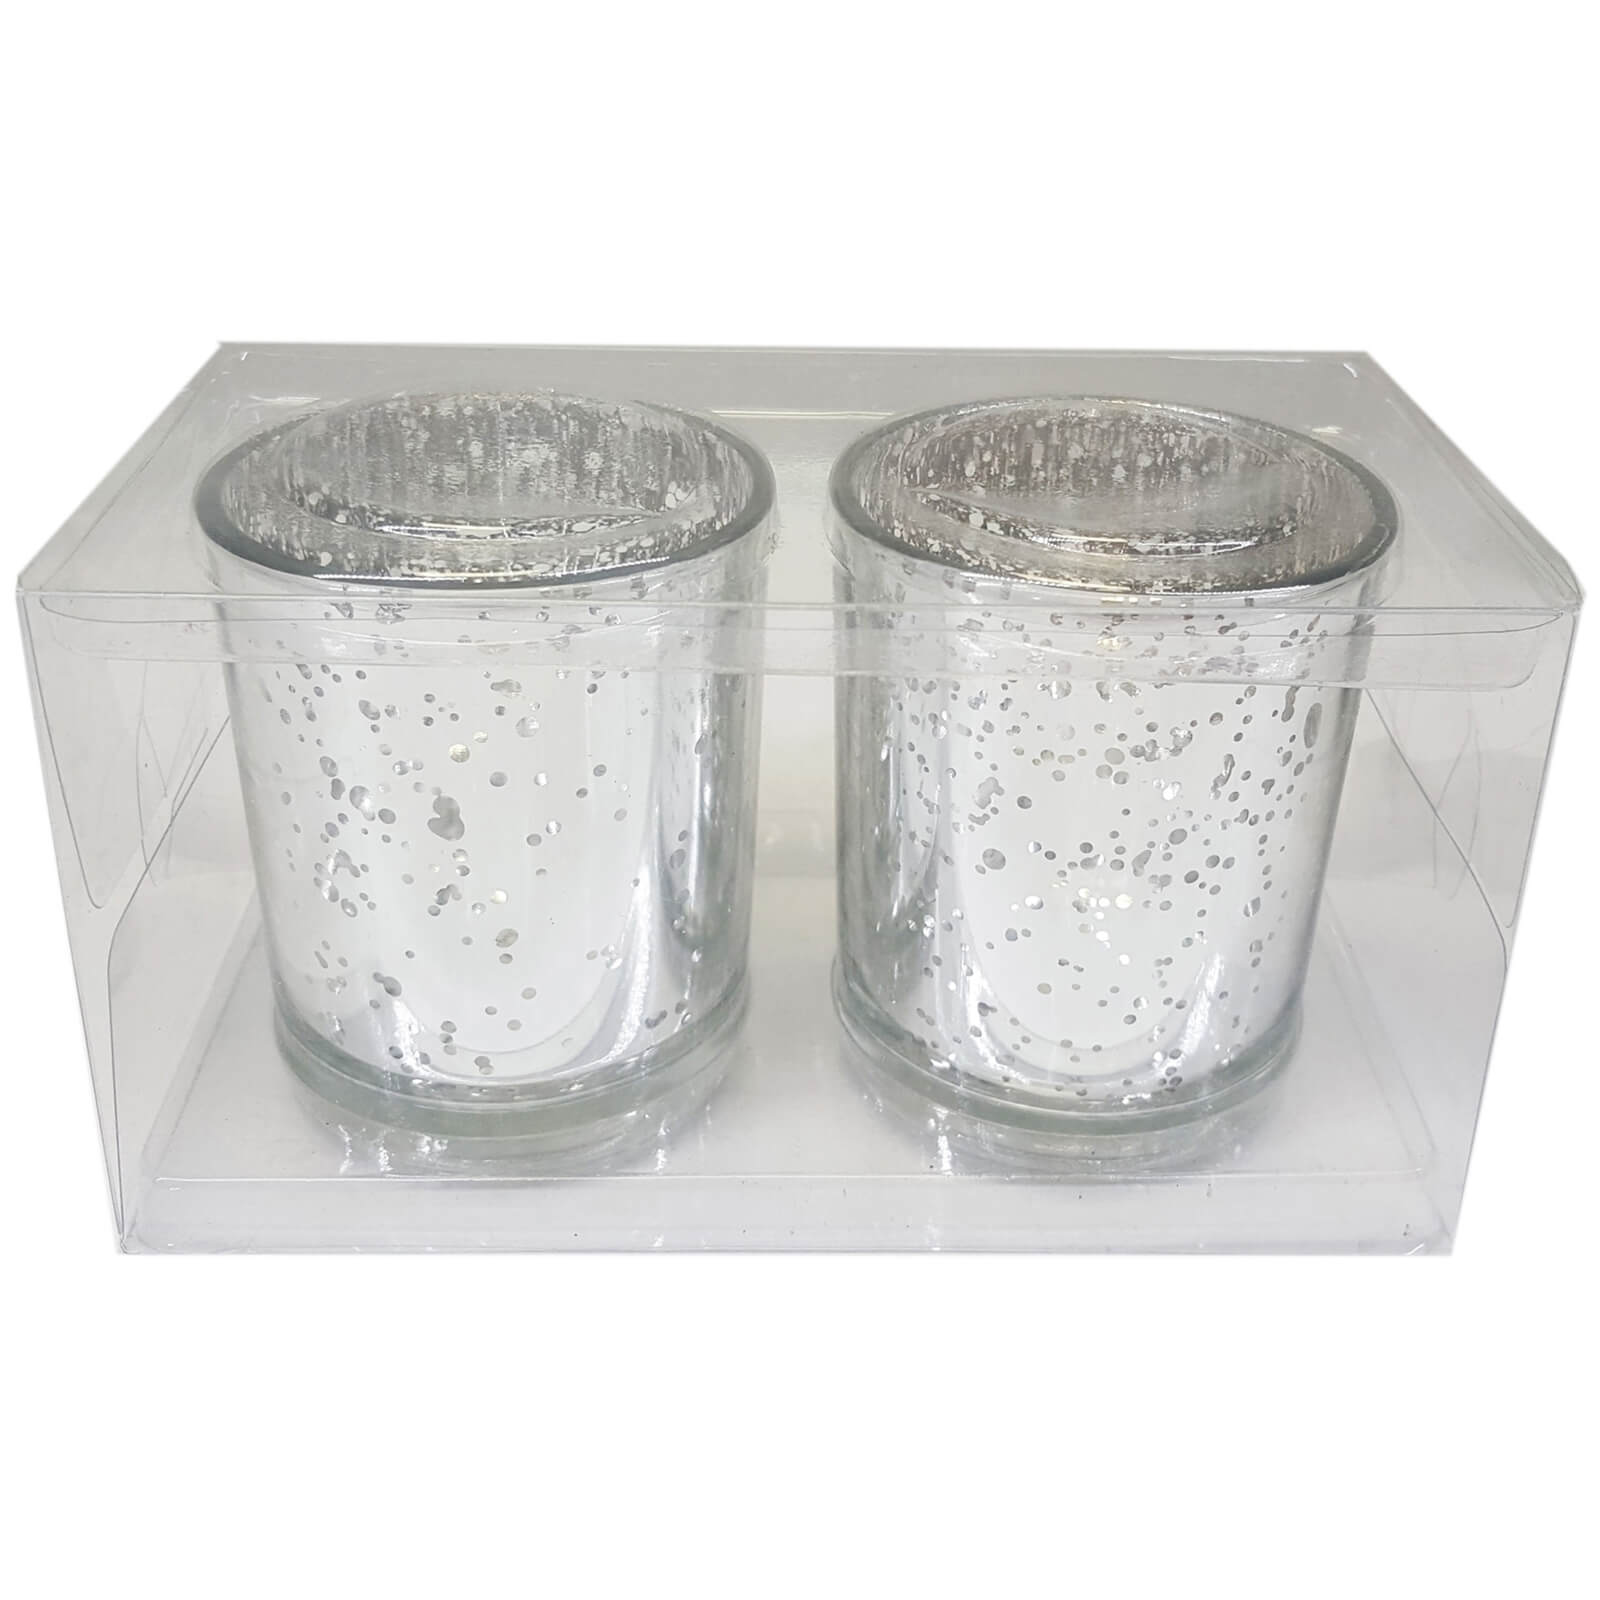 Set of 2 Tealight Candle Holder - Silver Mercury